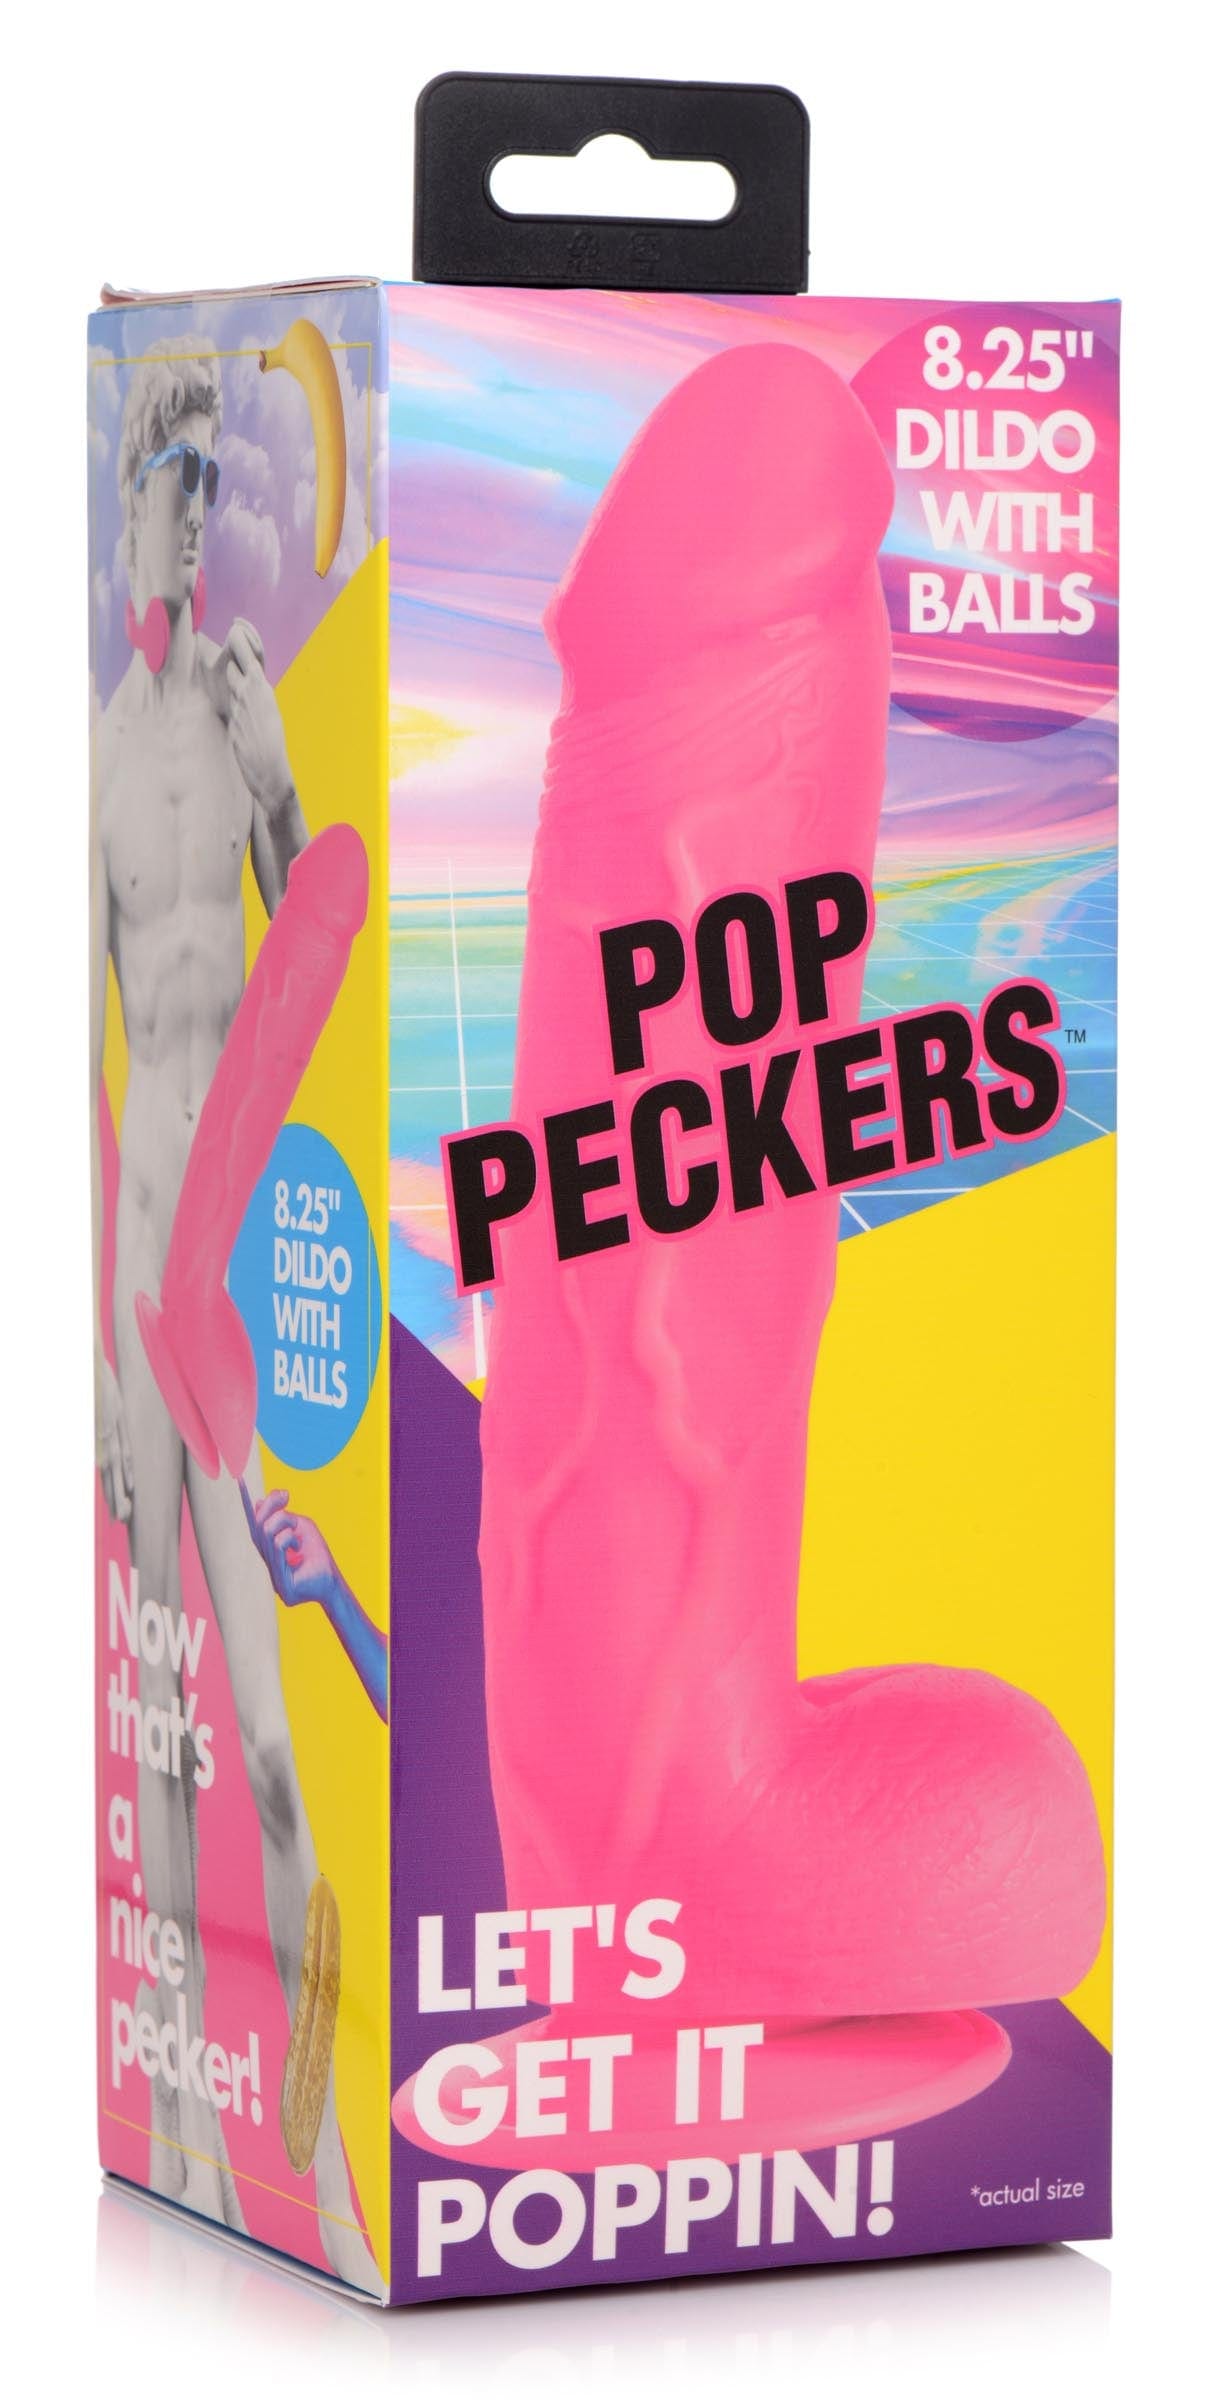 Pop Peckers Realistic Dildo Pink Pop Peckers 8.25" Dildo with Balls at the Haus of Shag